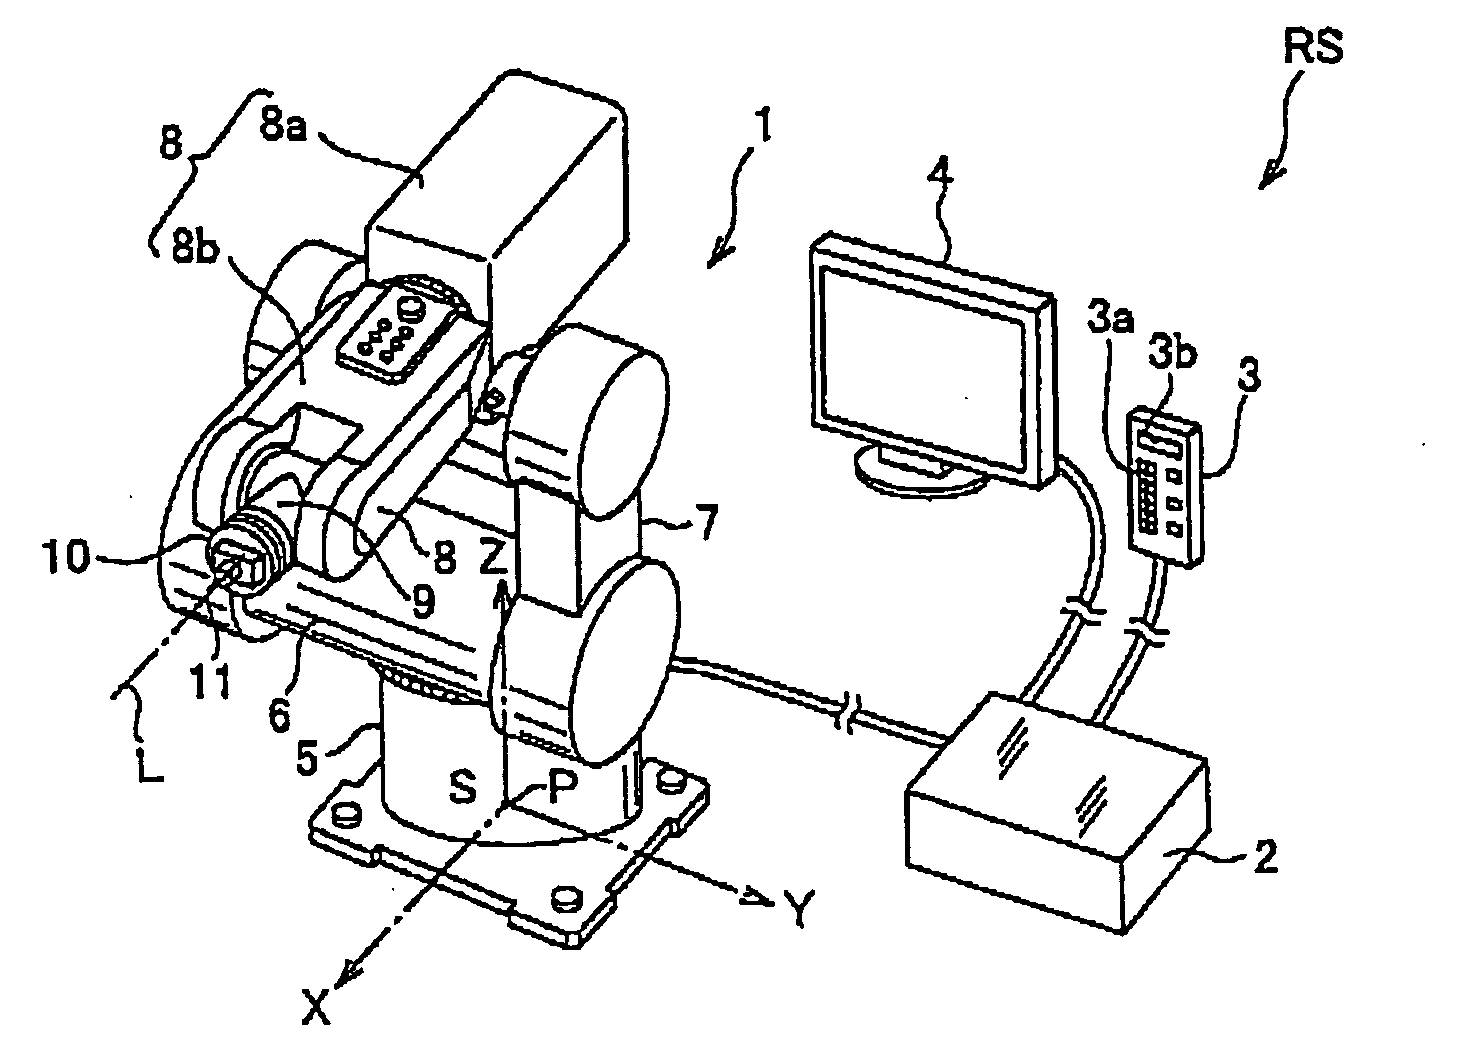 Apparatus for determining pickup pose of robot arm with camera